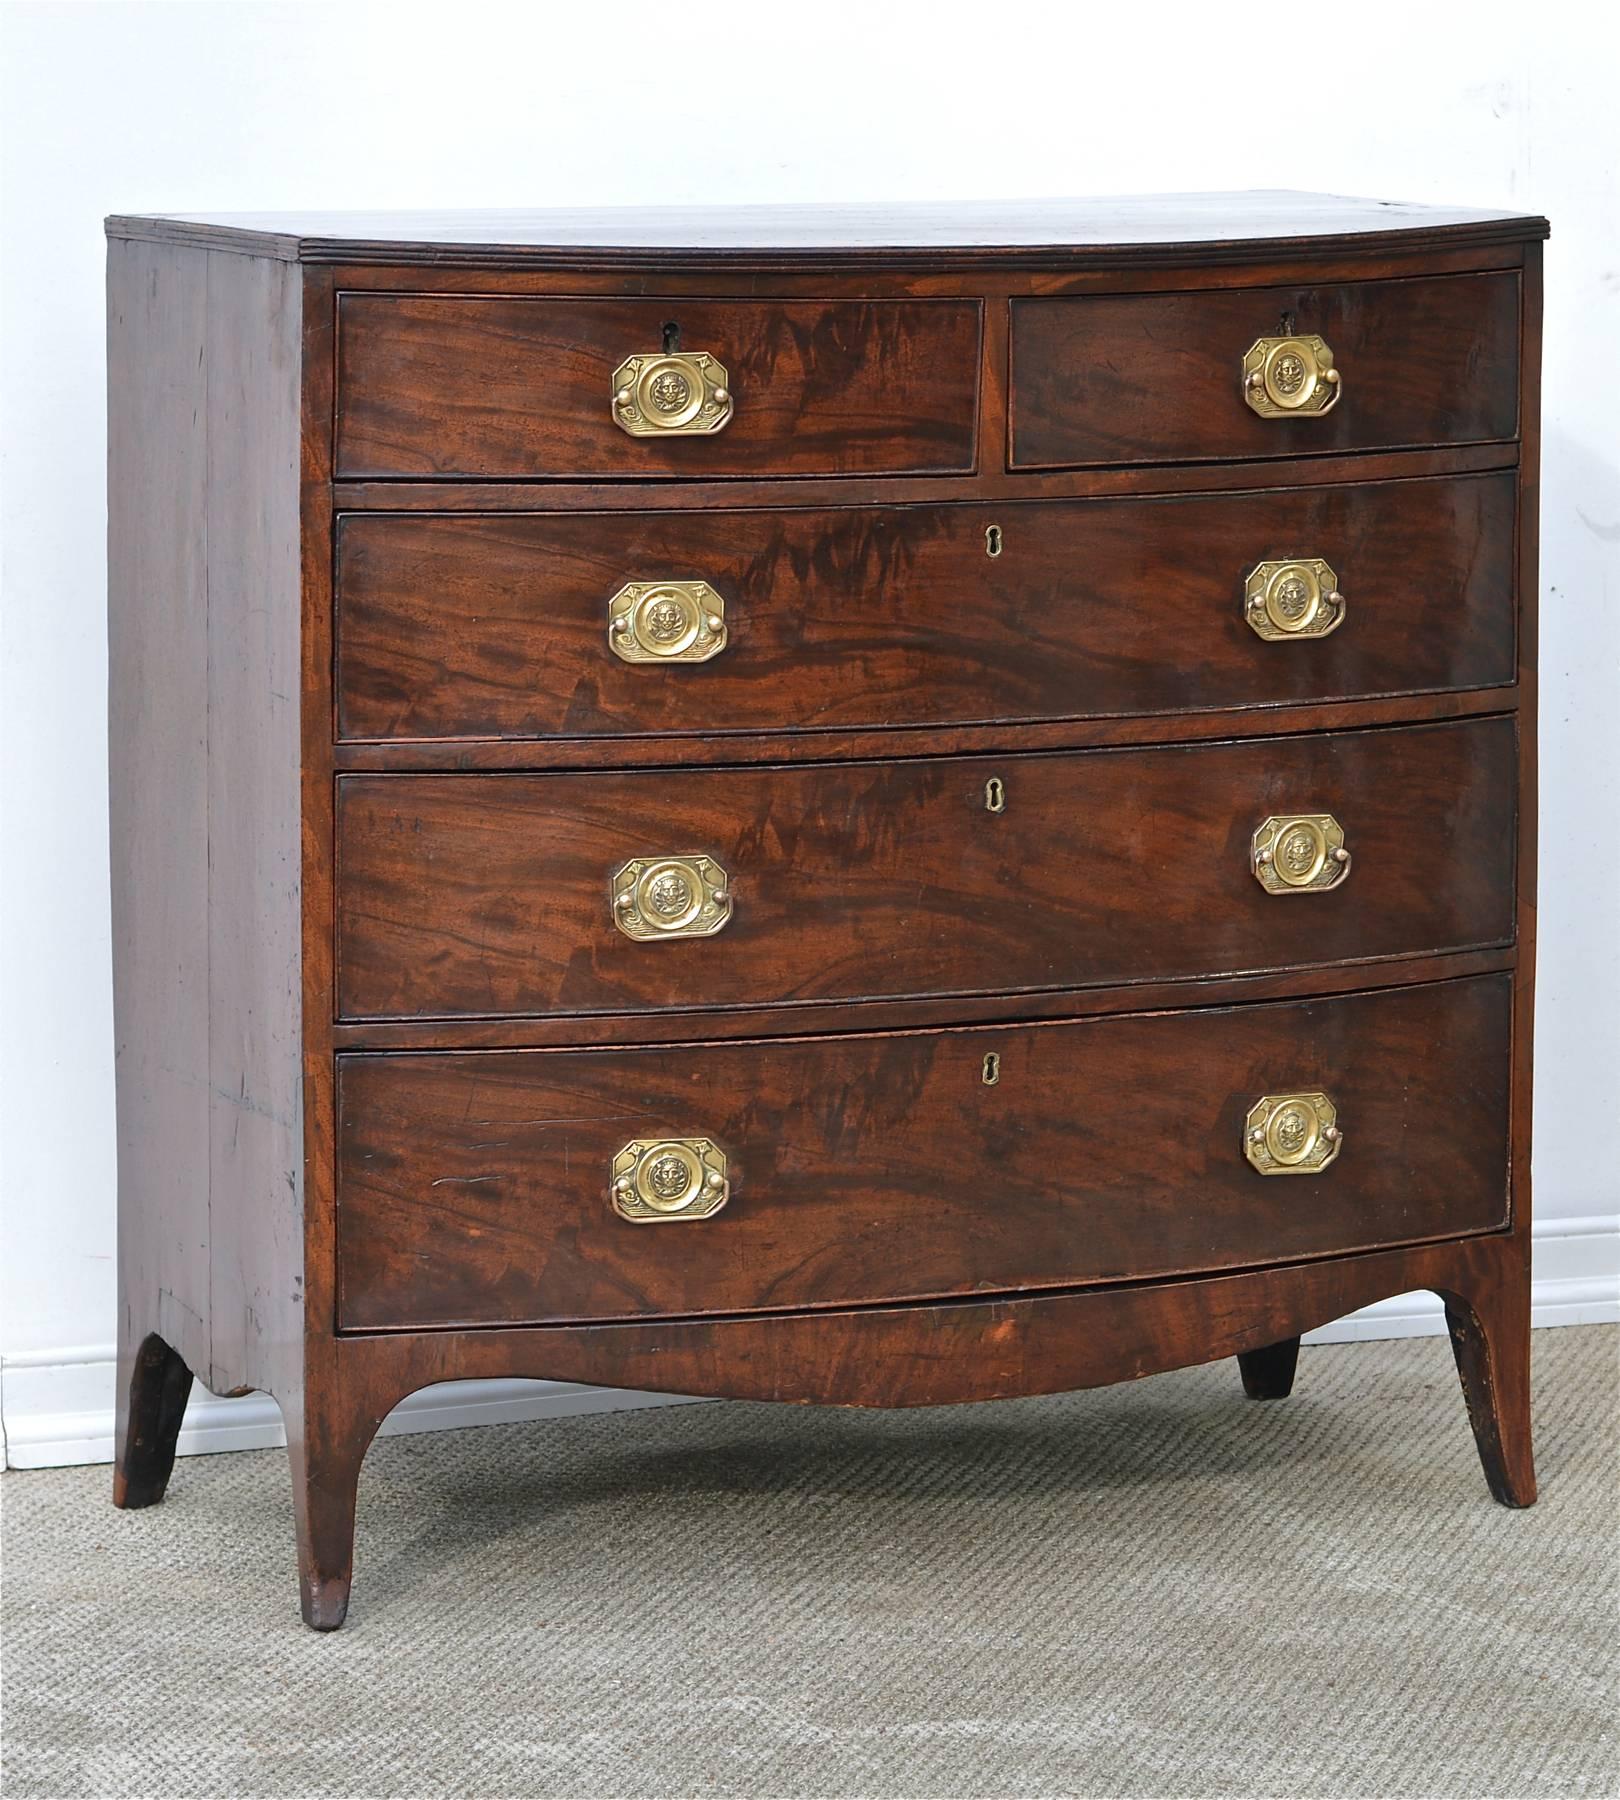 English Georgian Bowfront Chest of Drawers of Mahogany with Rare Brasses